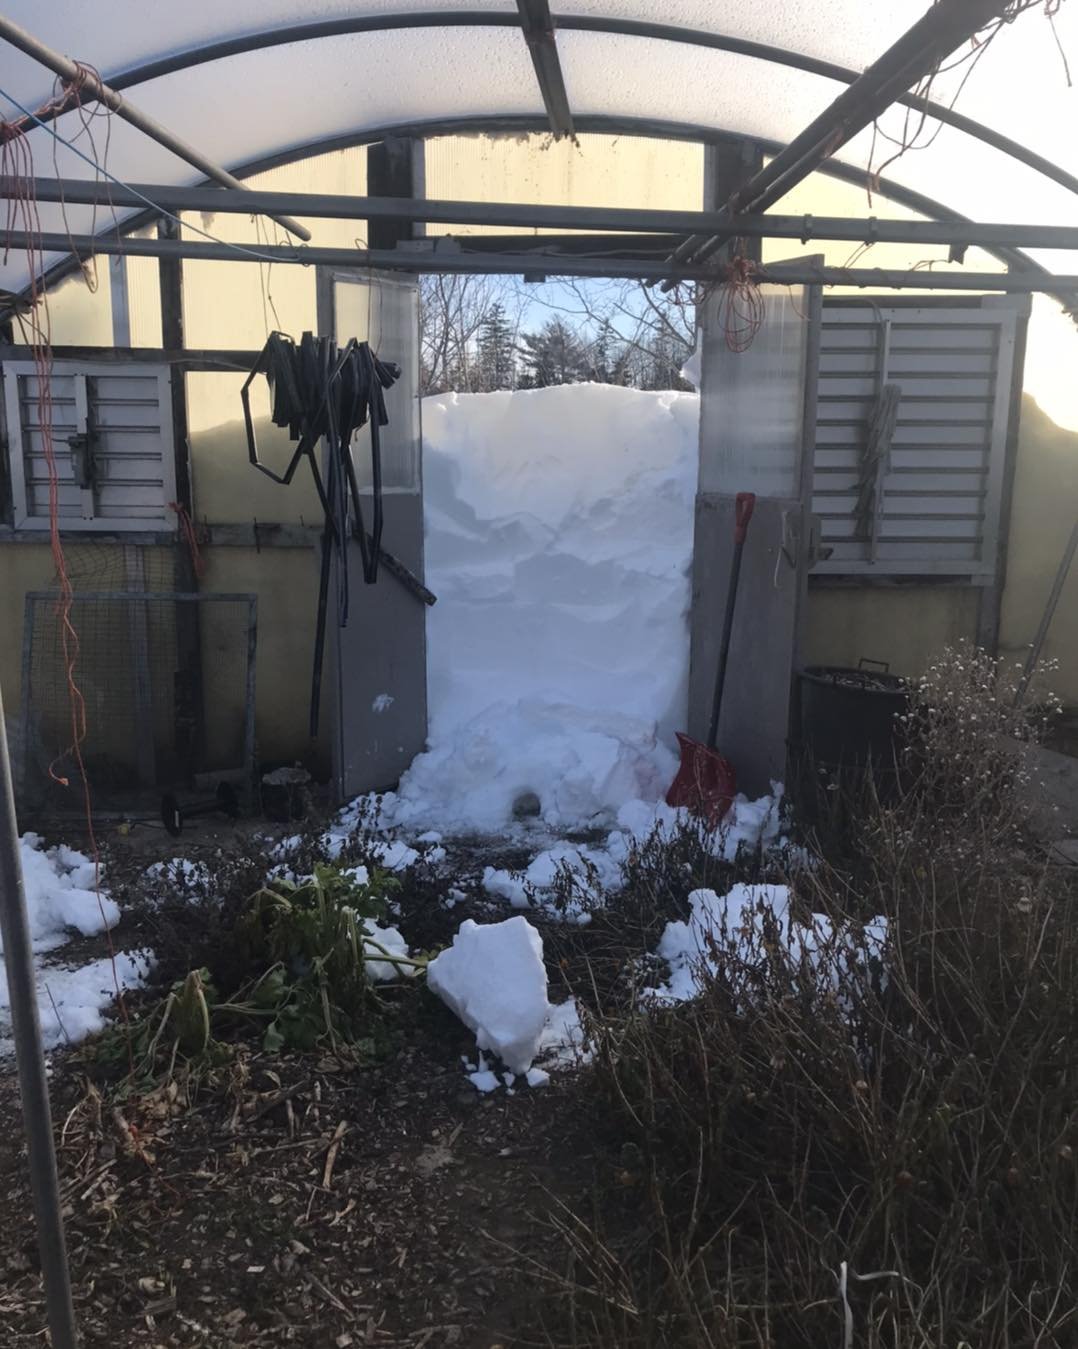 We&rsquo;re lucky our greenhouses are still standing! Finally made it inside to check on it and start shovelling the entrance.
Other farmers in the area were not so lucky&hellip; 
I feel like I&rsquo;ll have to pay for that shovelling in massages and